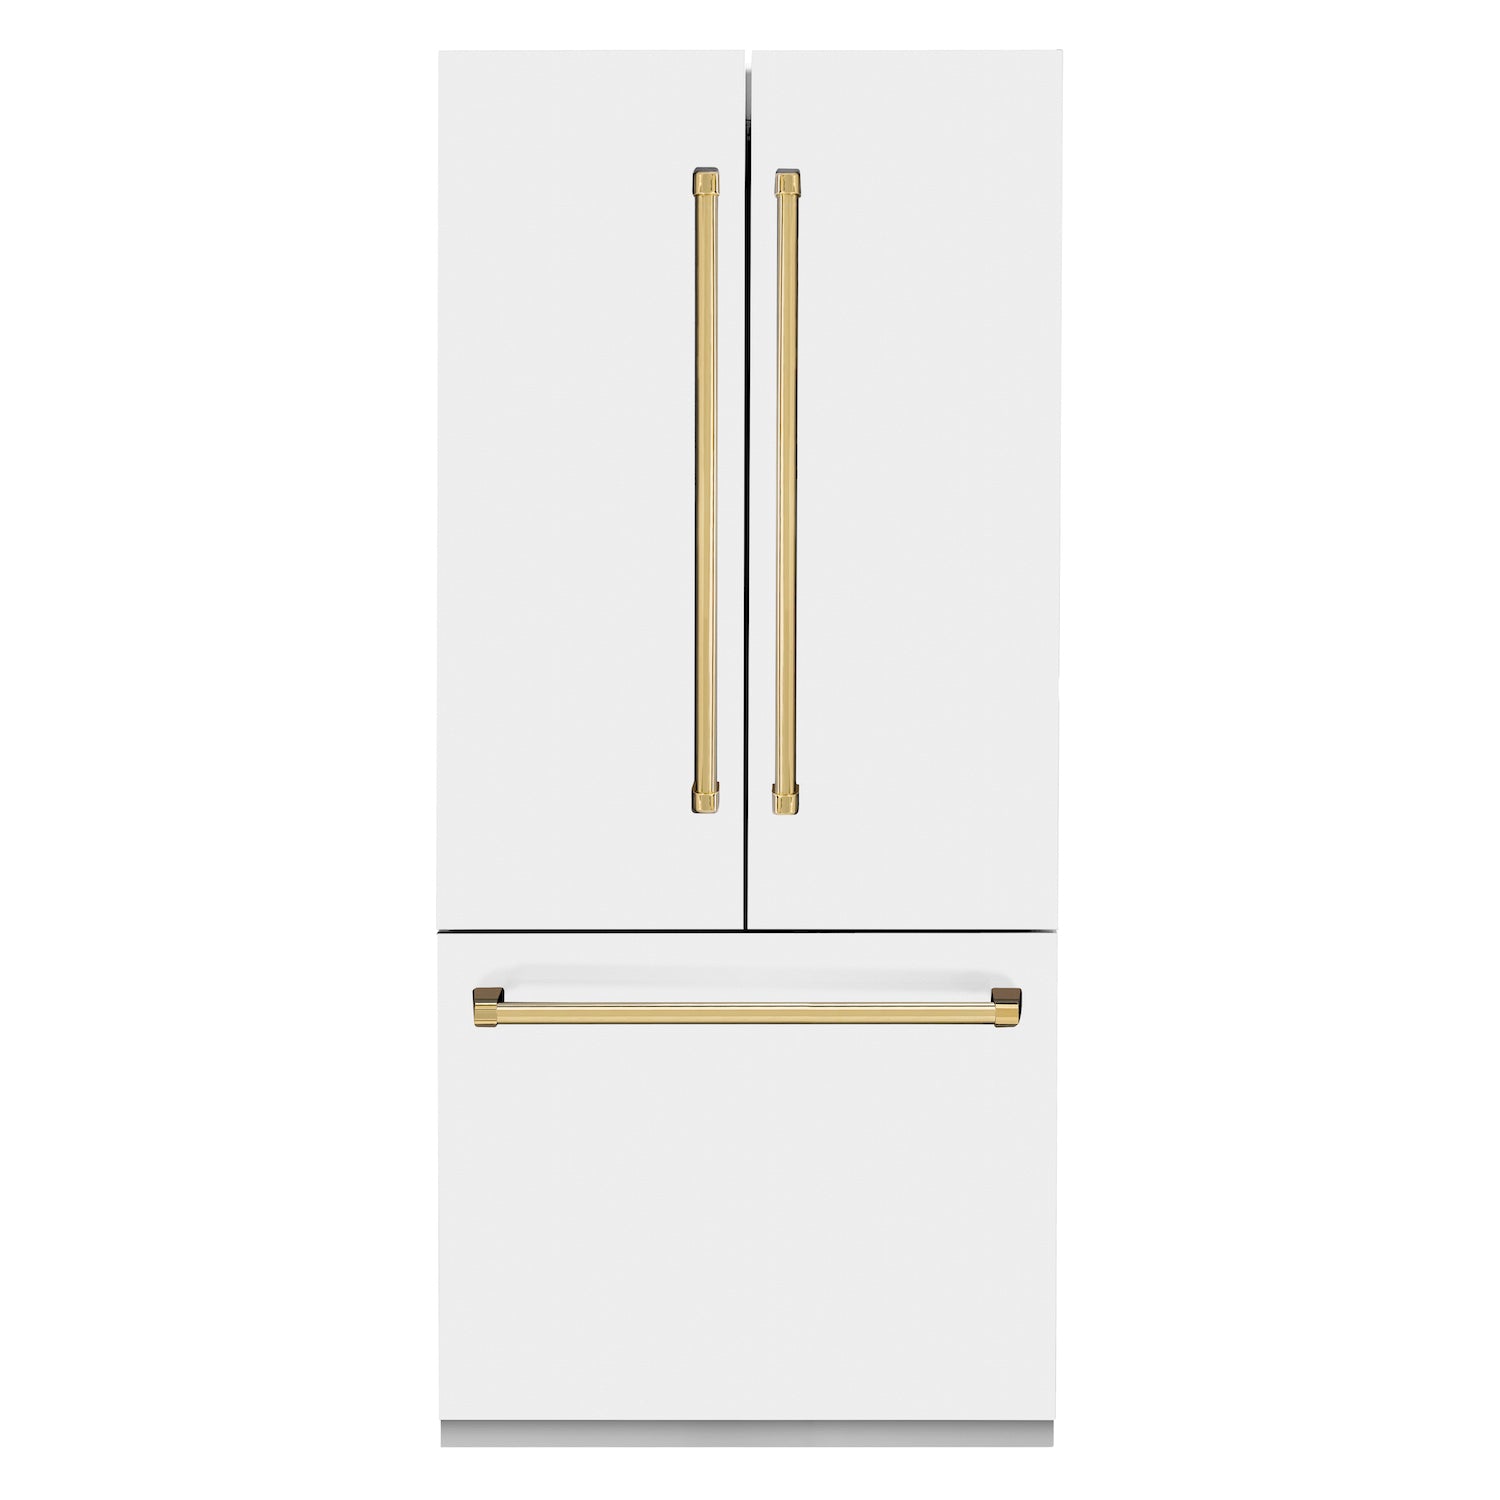 ZLINE 36" Built-In 2-Door Bottom Freezer Refrigerator with Internal Water and Ice Dispenser - Matte White with Accents